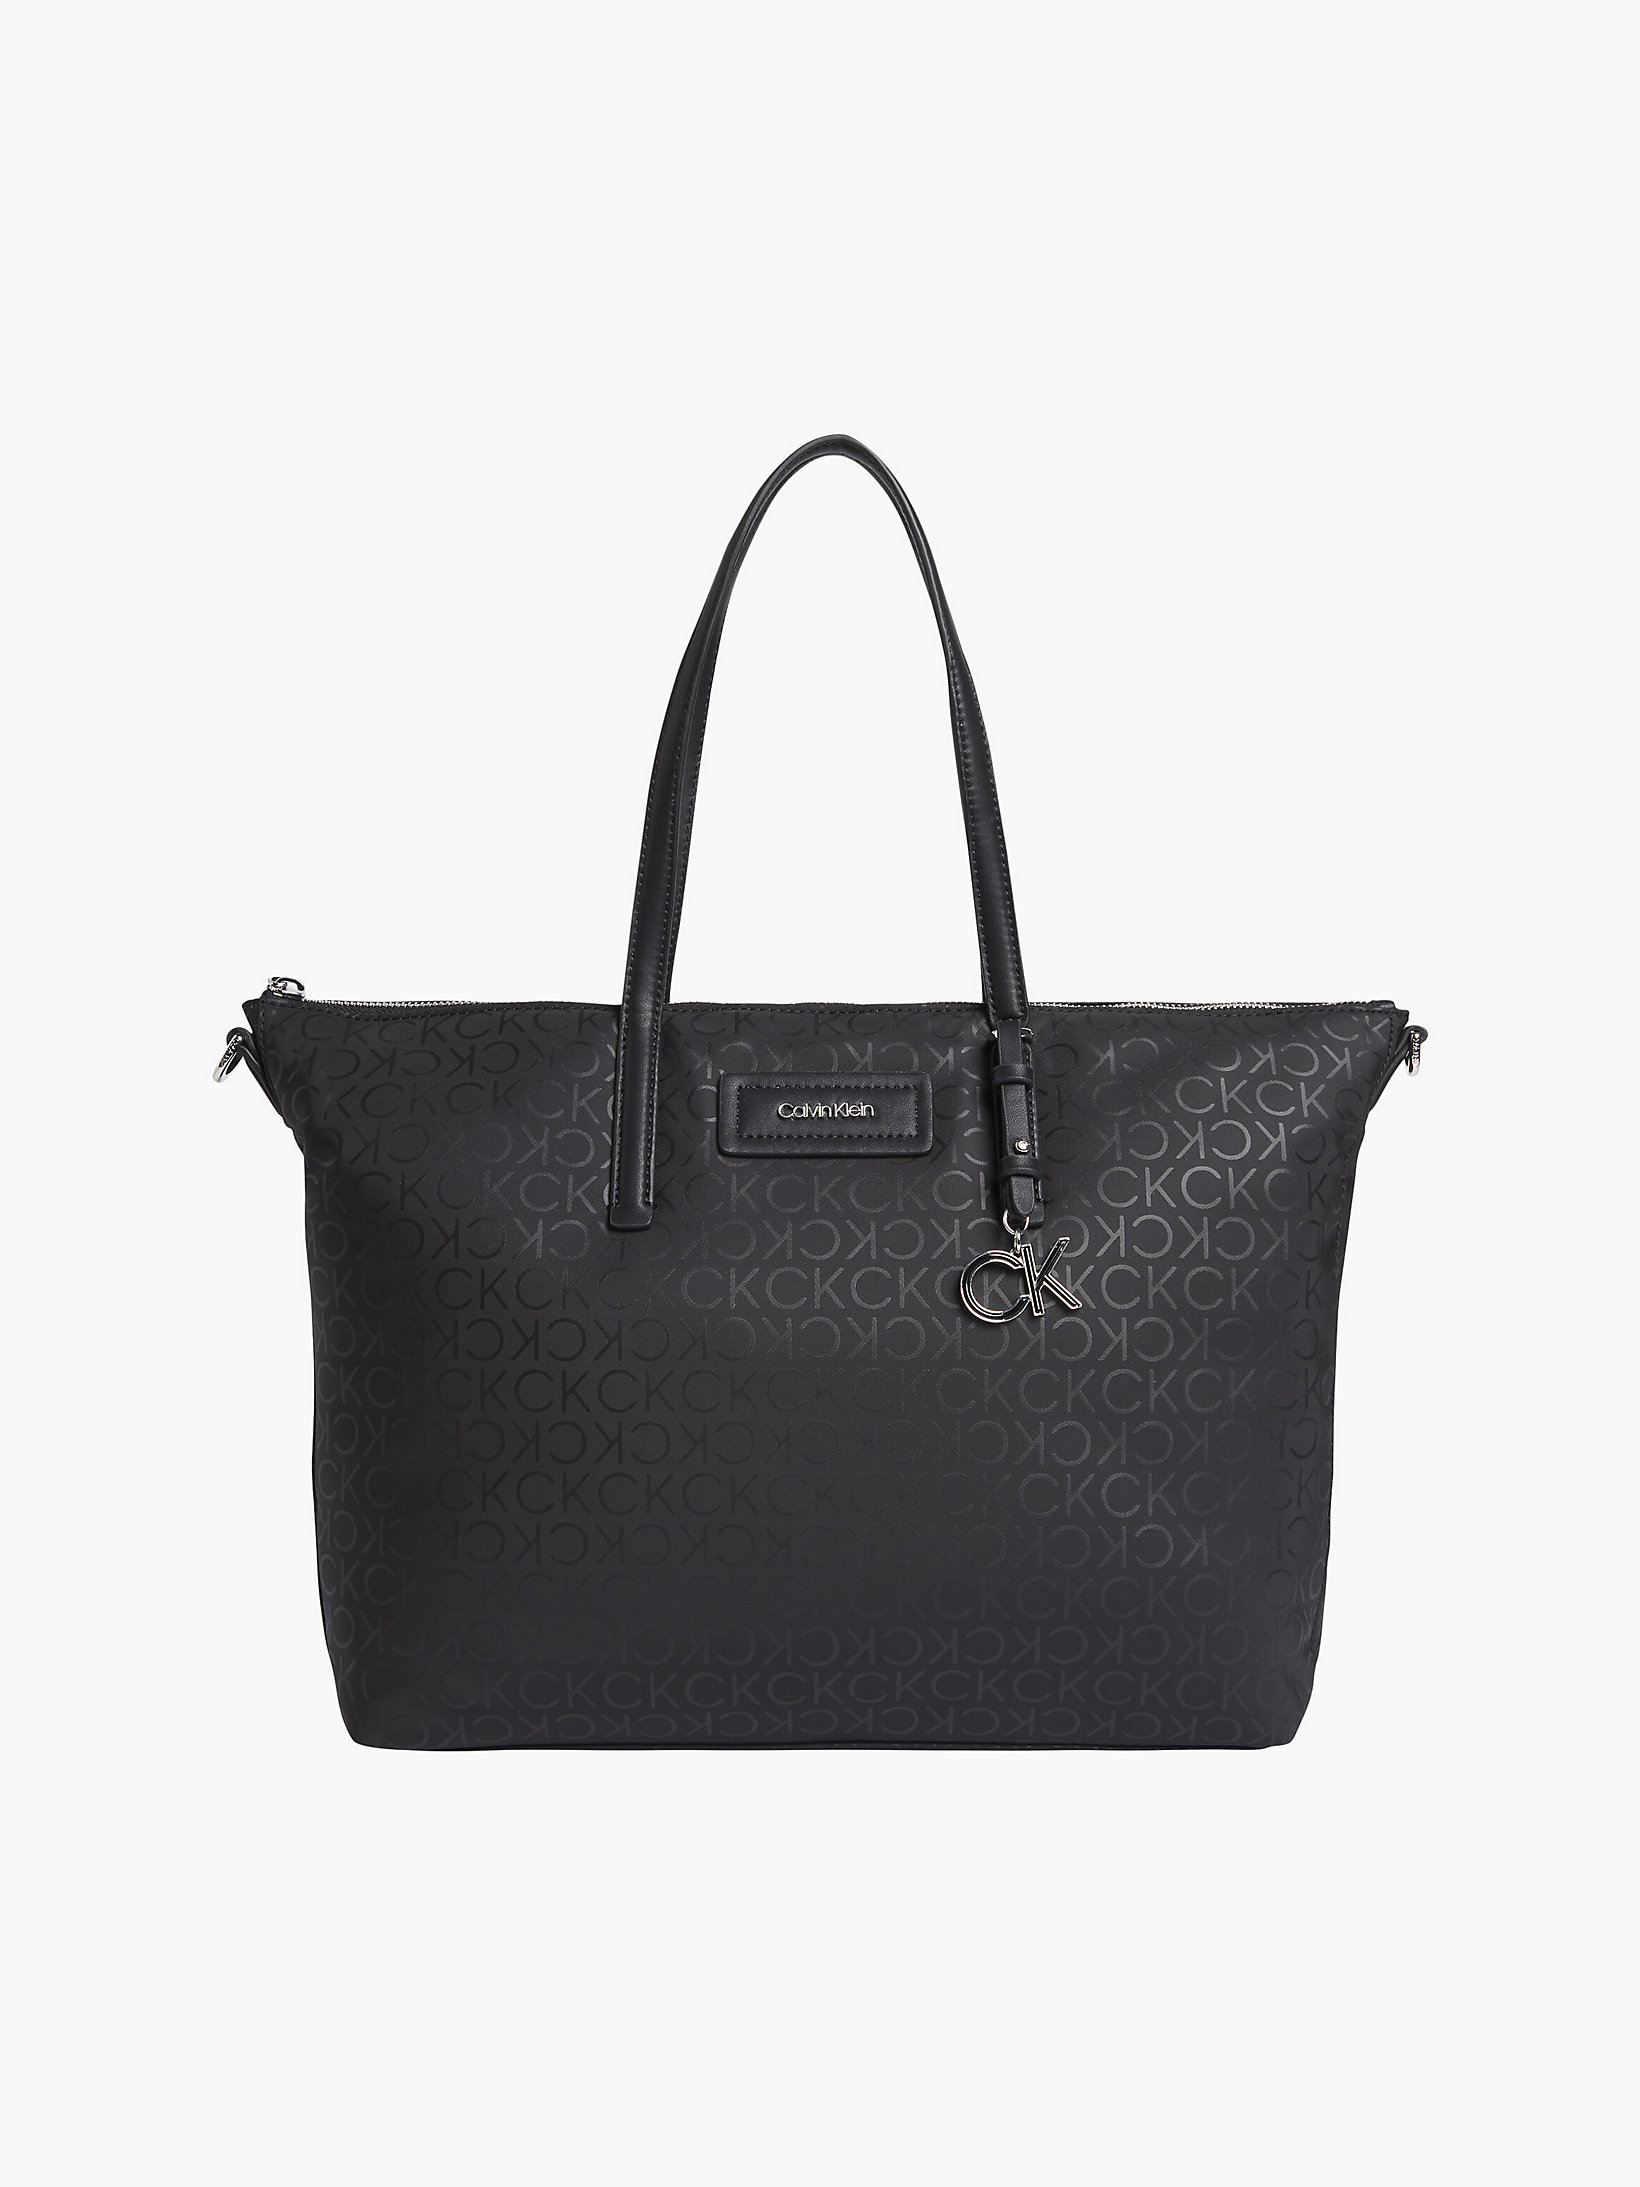 Black Mono Recycled Tote Bag undefined women Calvin Klein